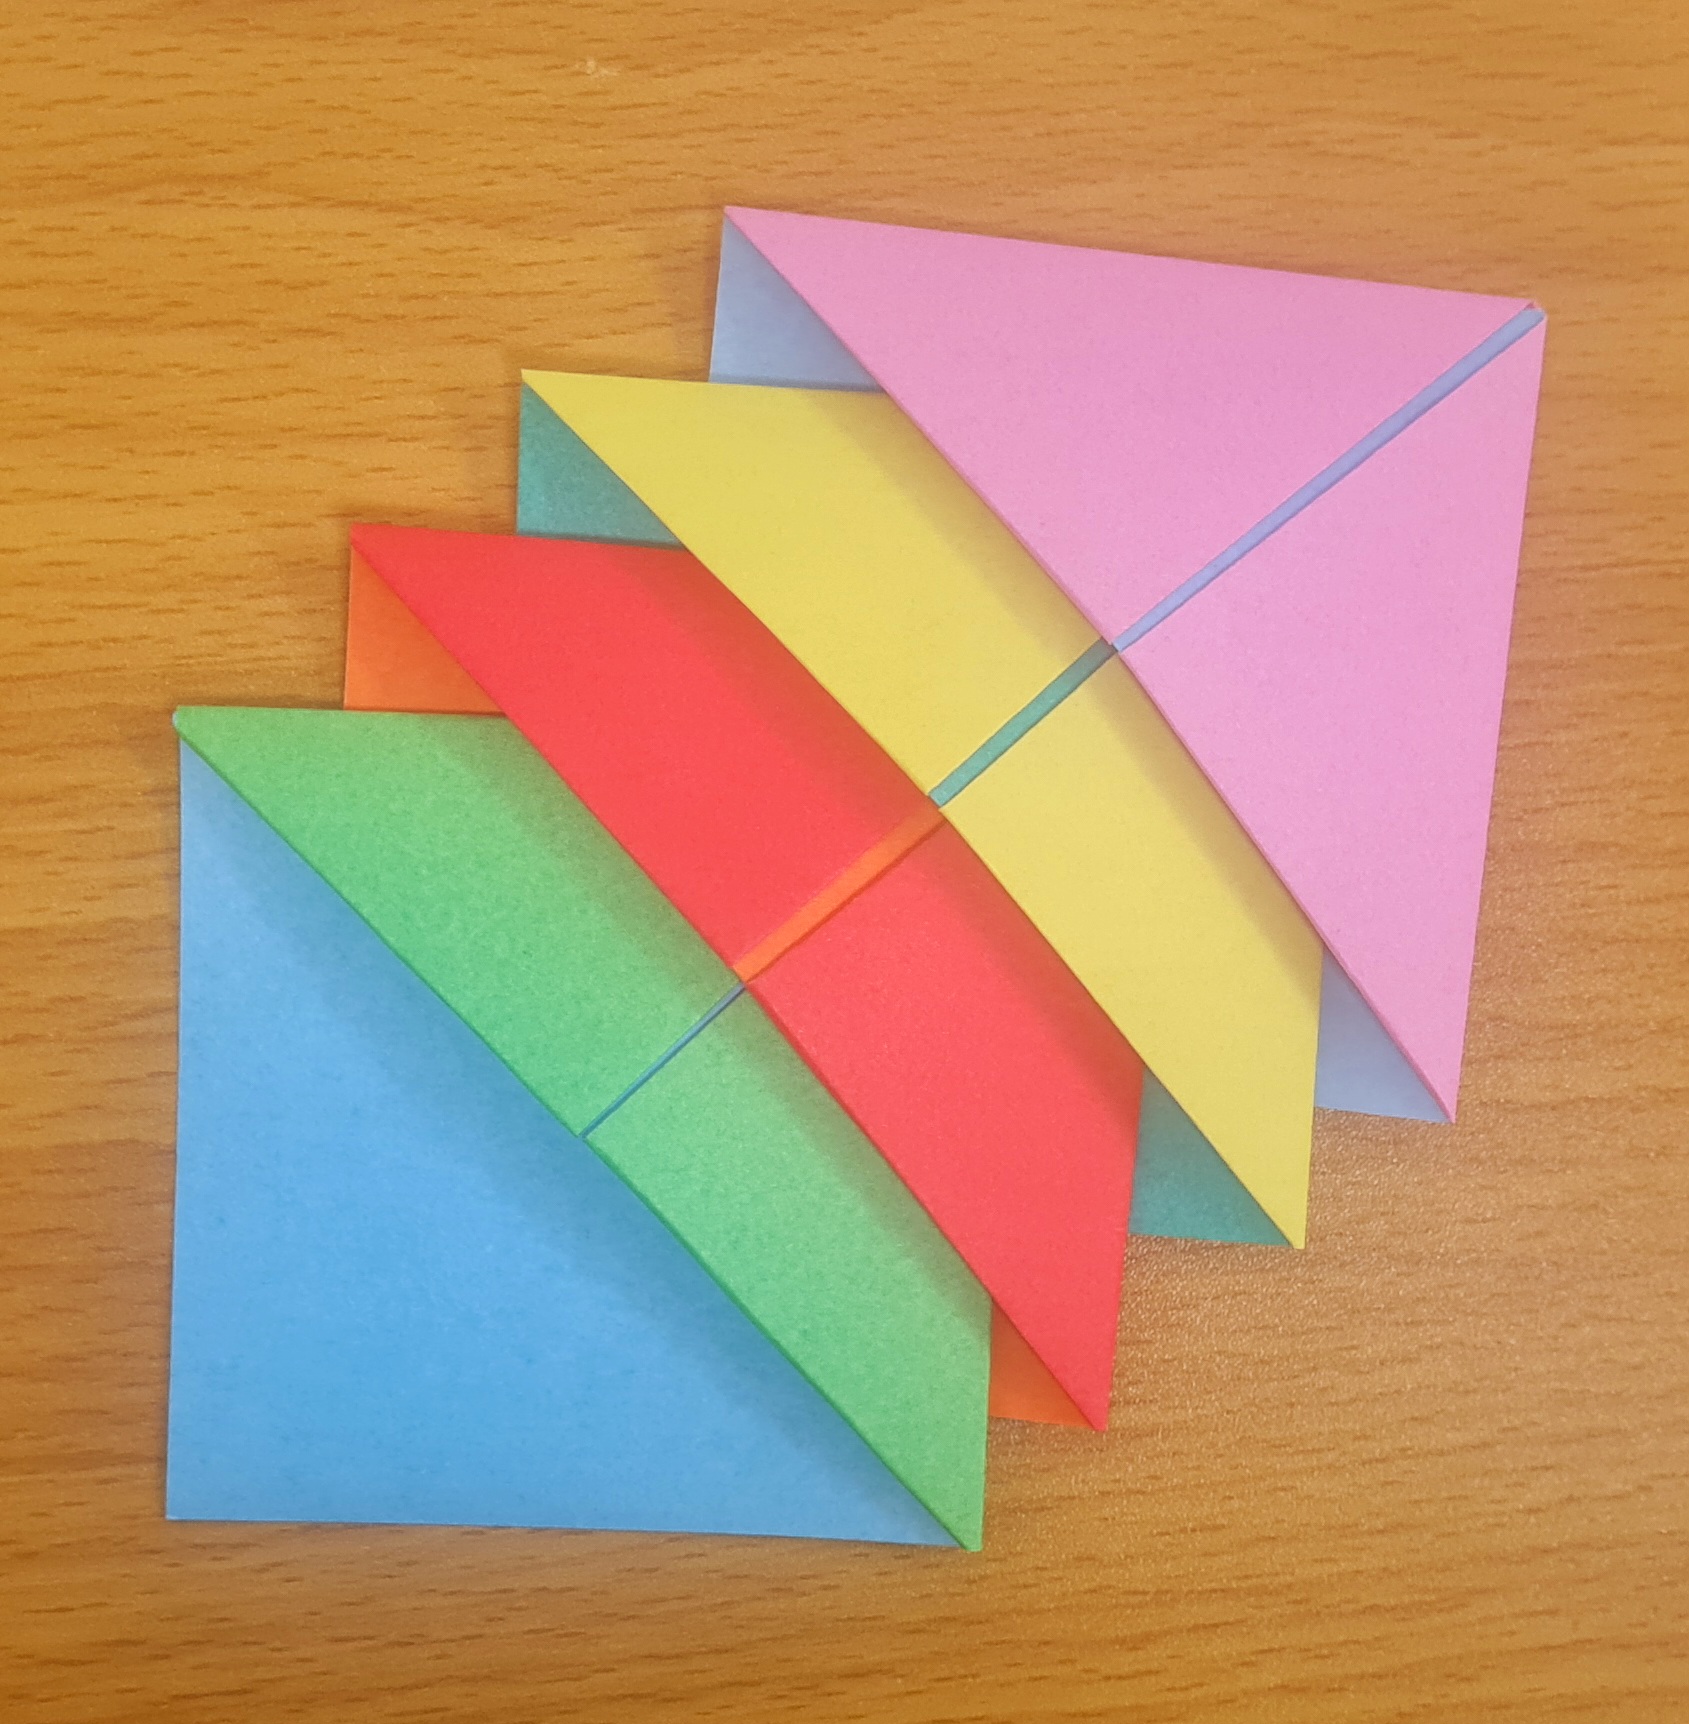 Origami image of folded sheets of coloured paper